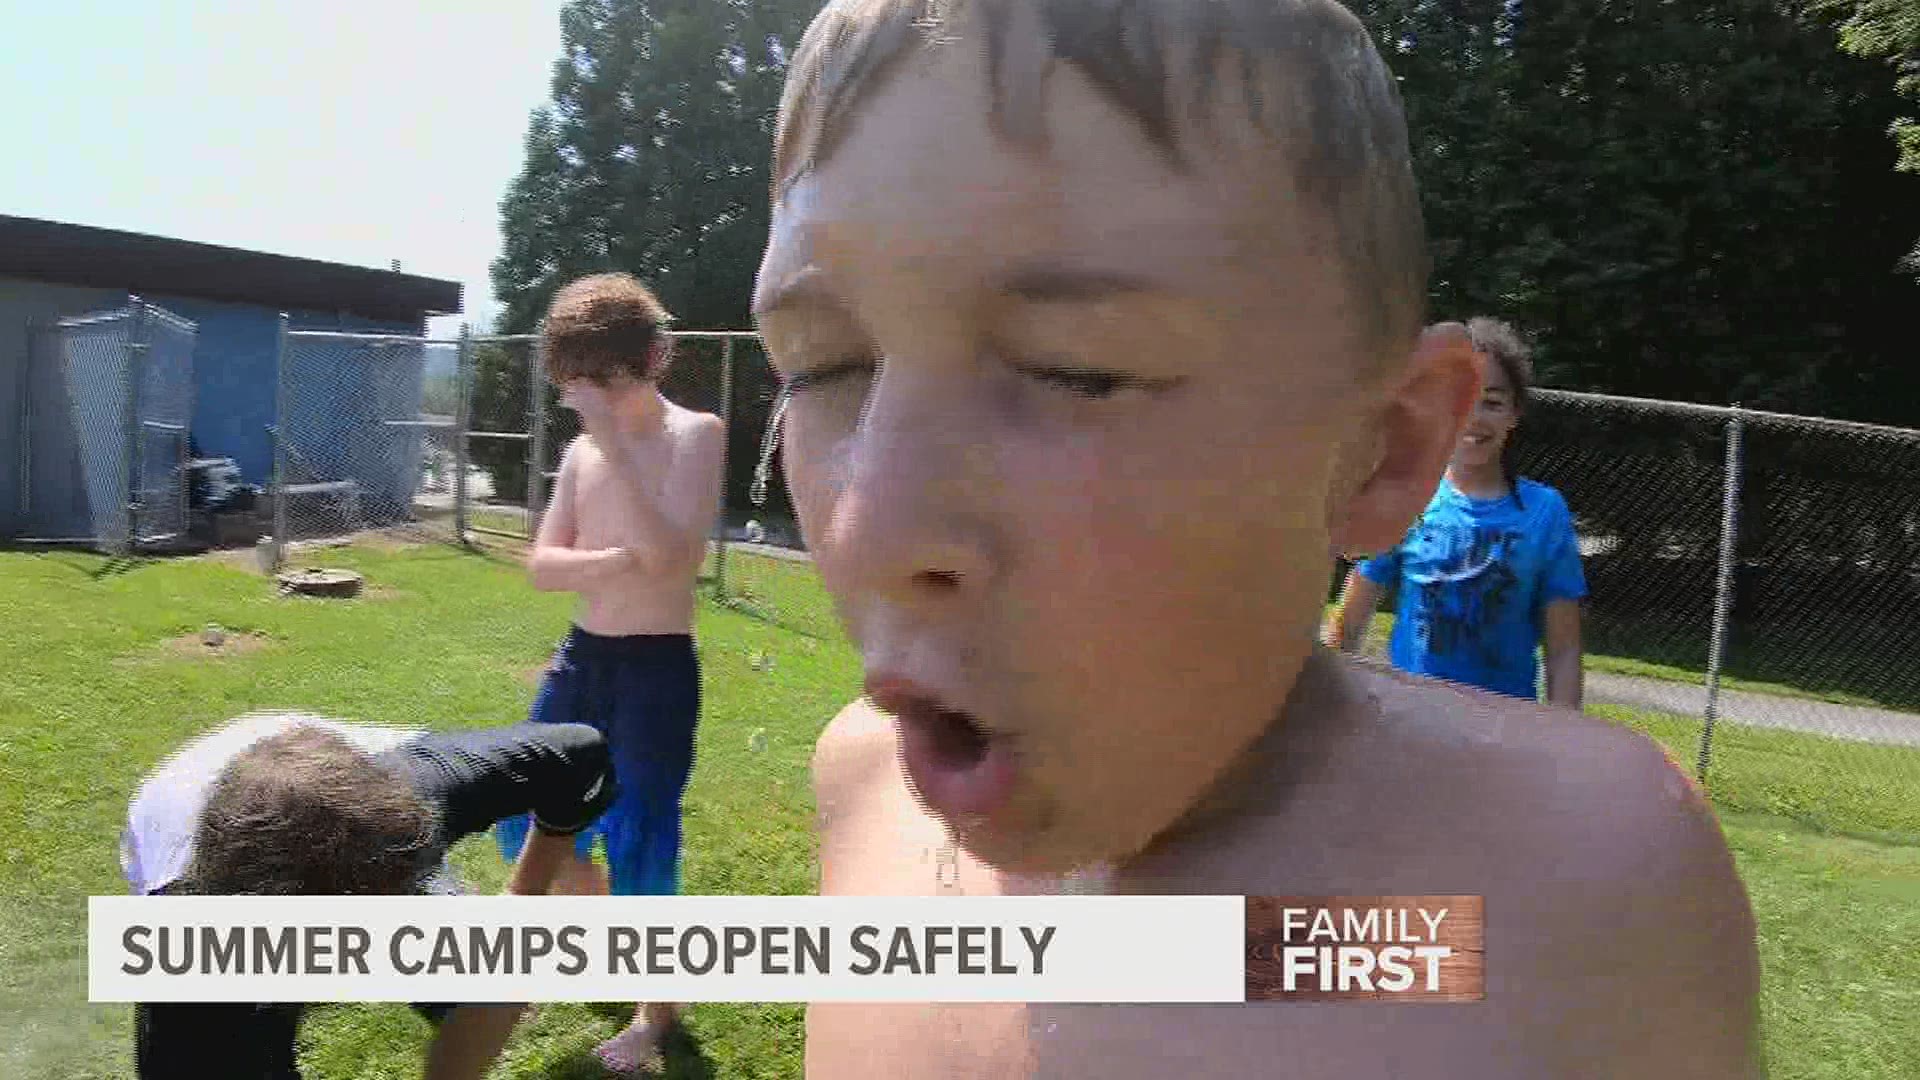 After a year away due to the pandemic, many camps are reopening this season with CDC-recommended mitigation efforts in place to keep children safe.